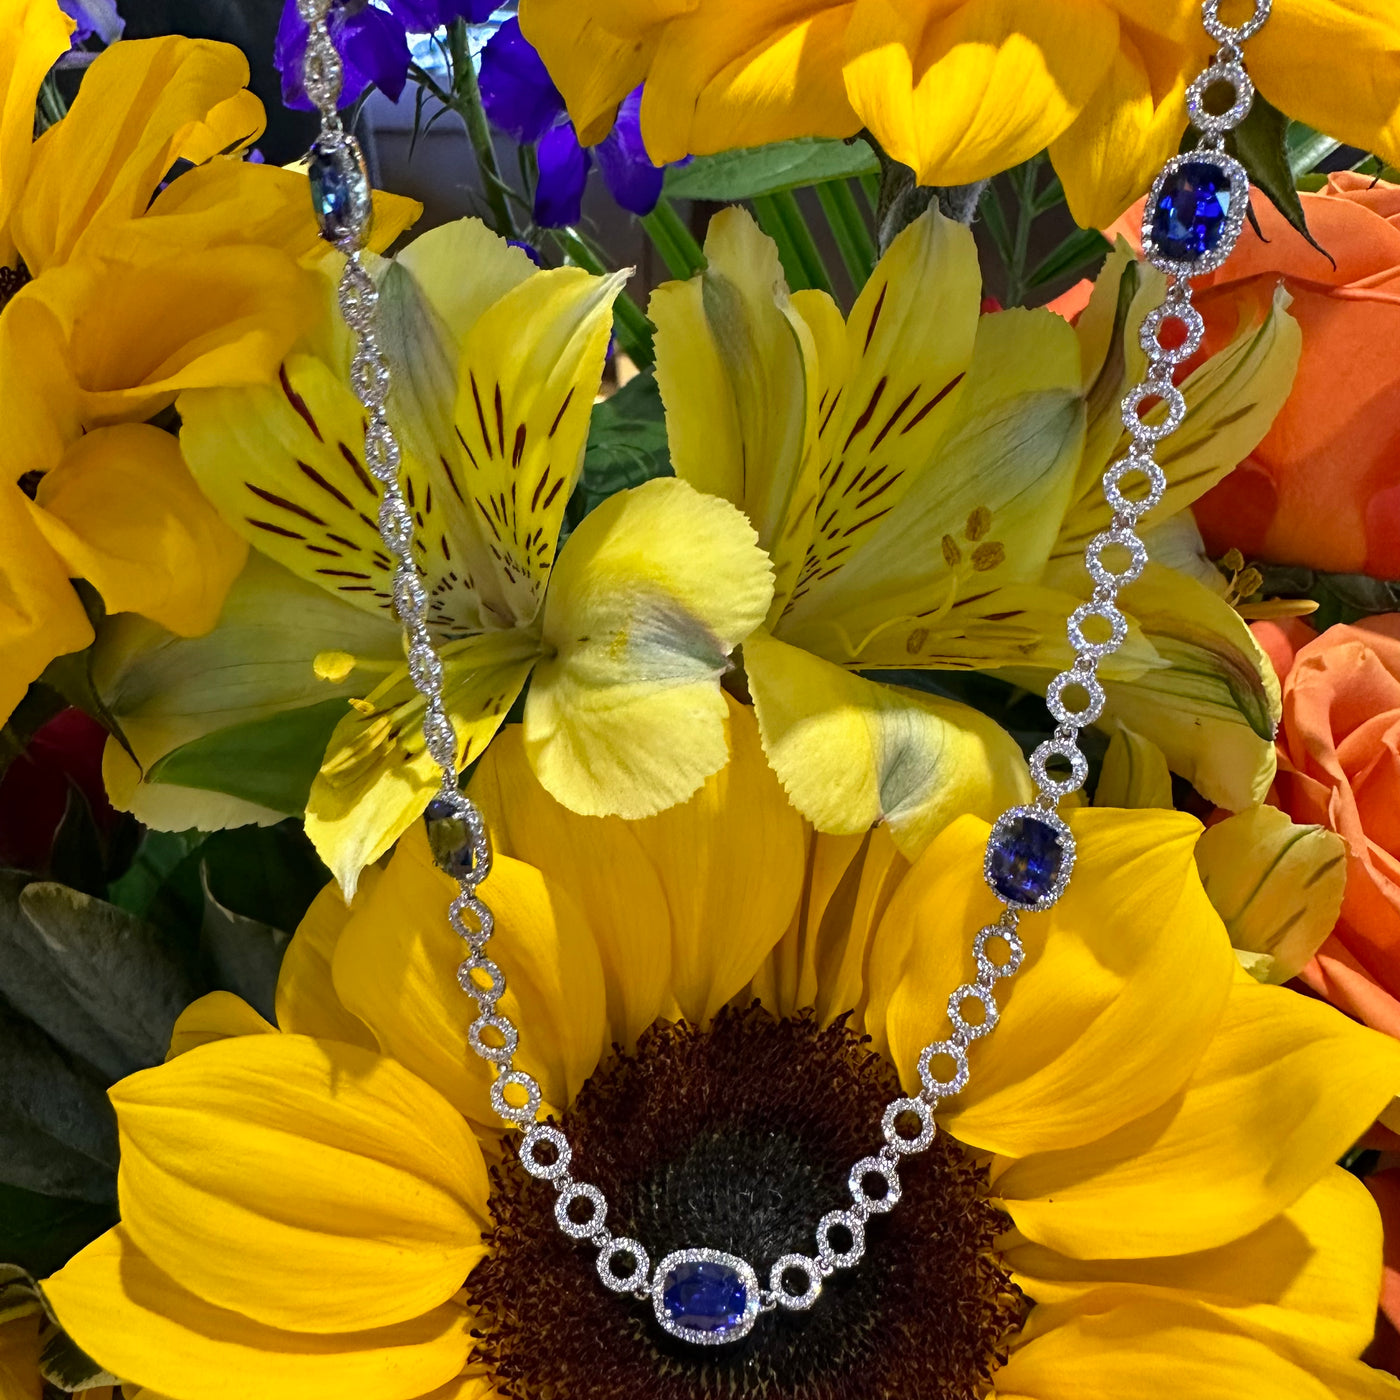 Sapphire and Pavé Diamond Necklace in 18K White Gold